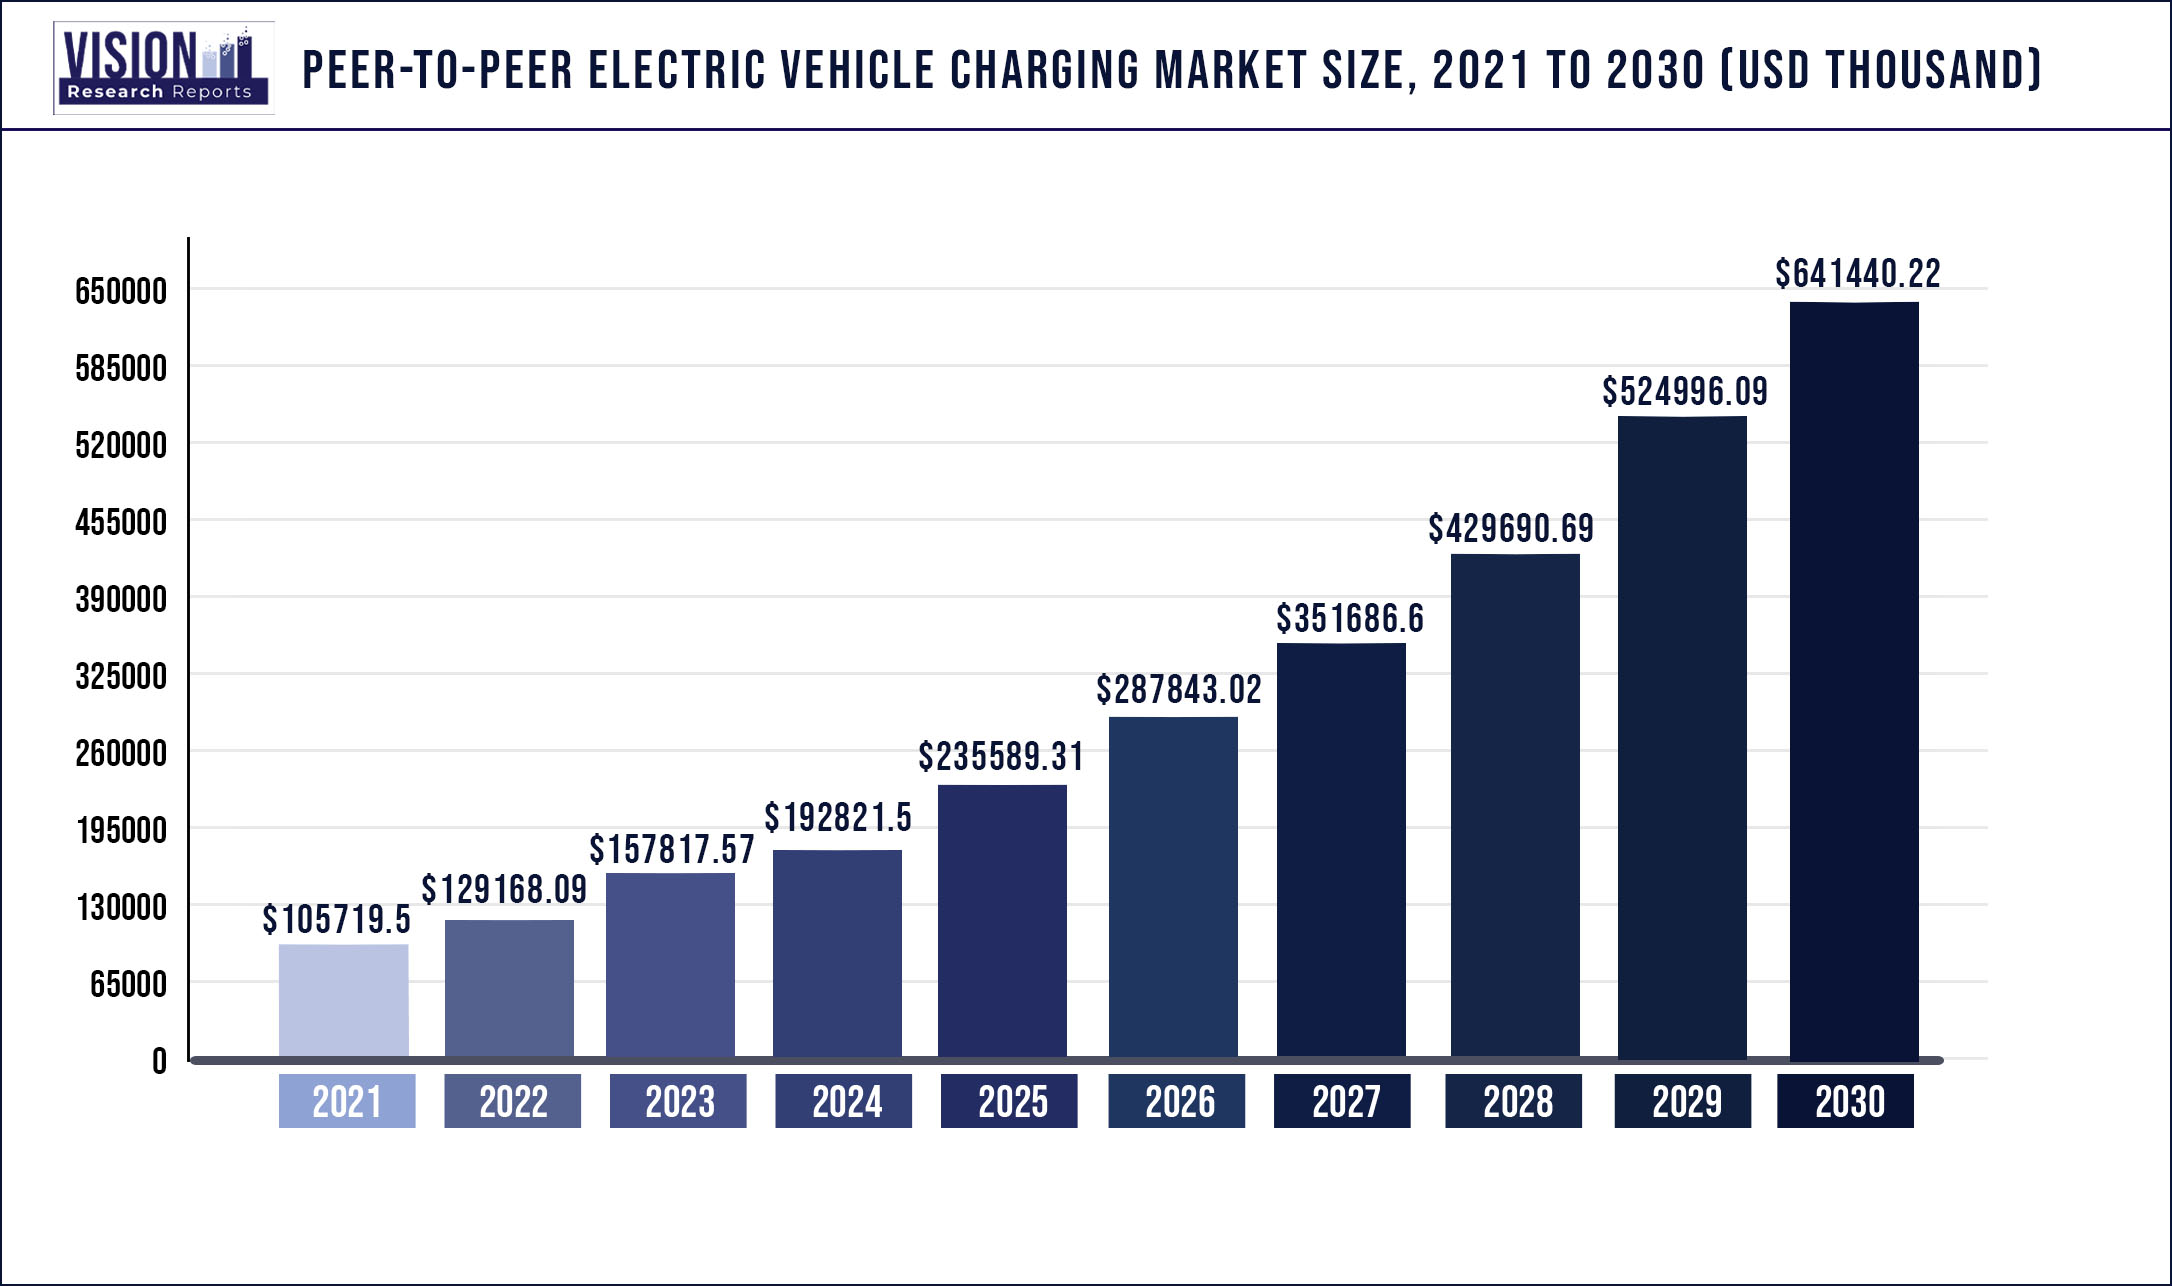 Peer to Peer Electric Vehicle Charging Market Size 2021 to 2030